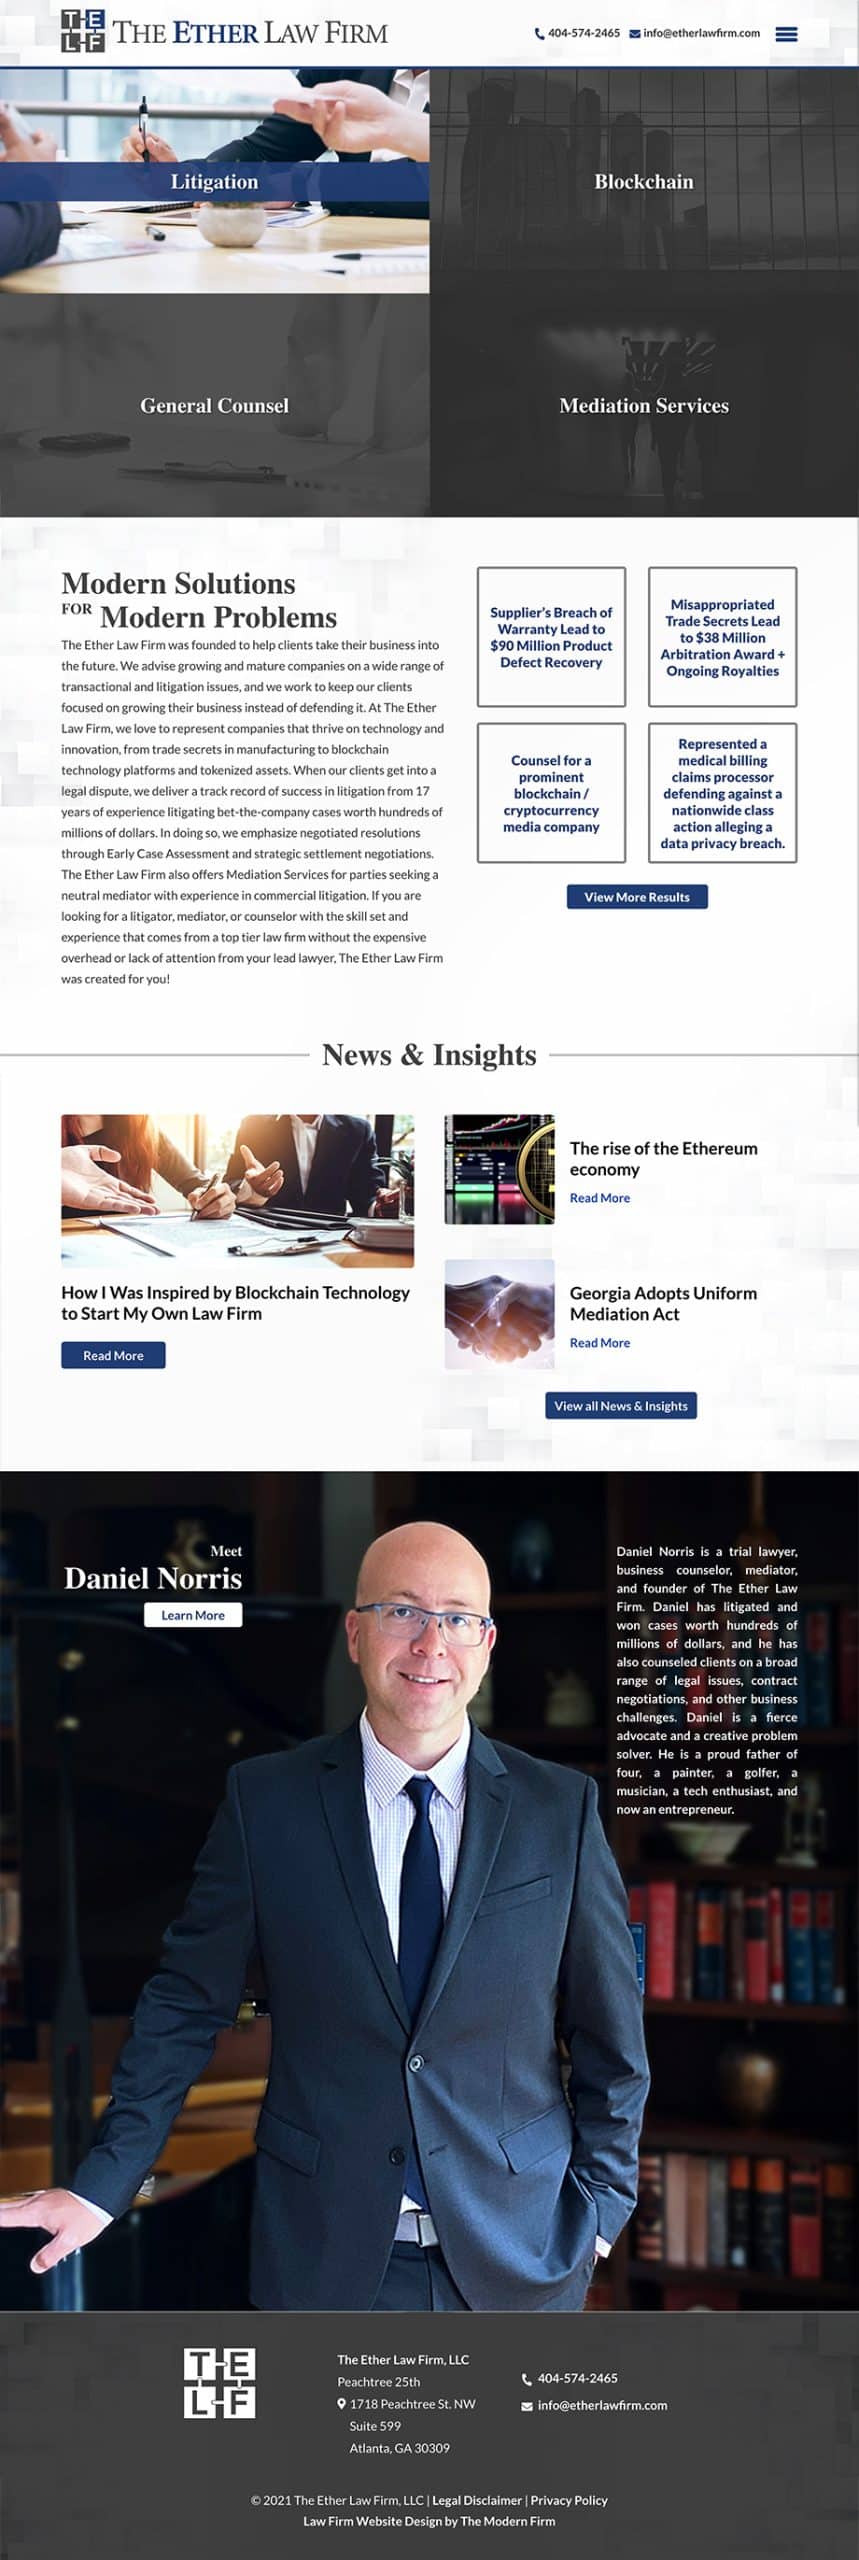 Law Firm Website for The Ether Law Firm, LLC